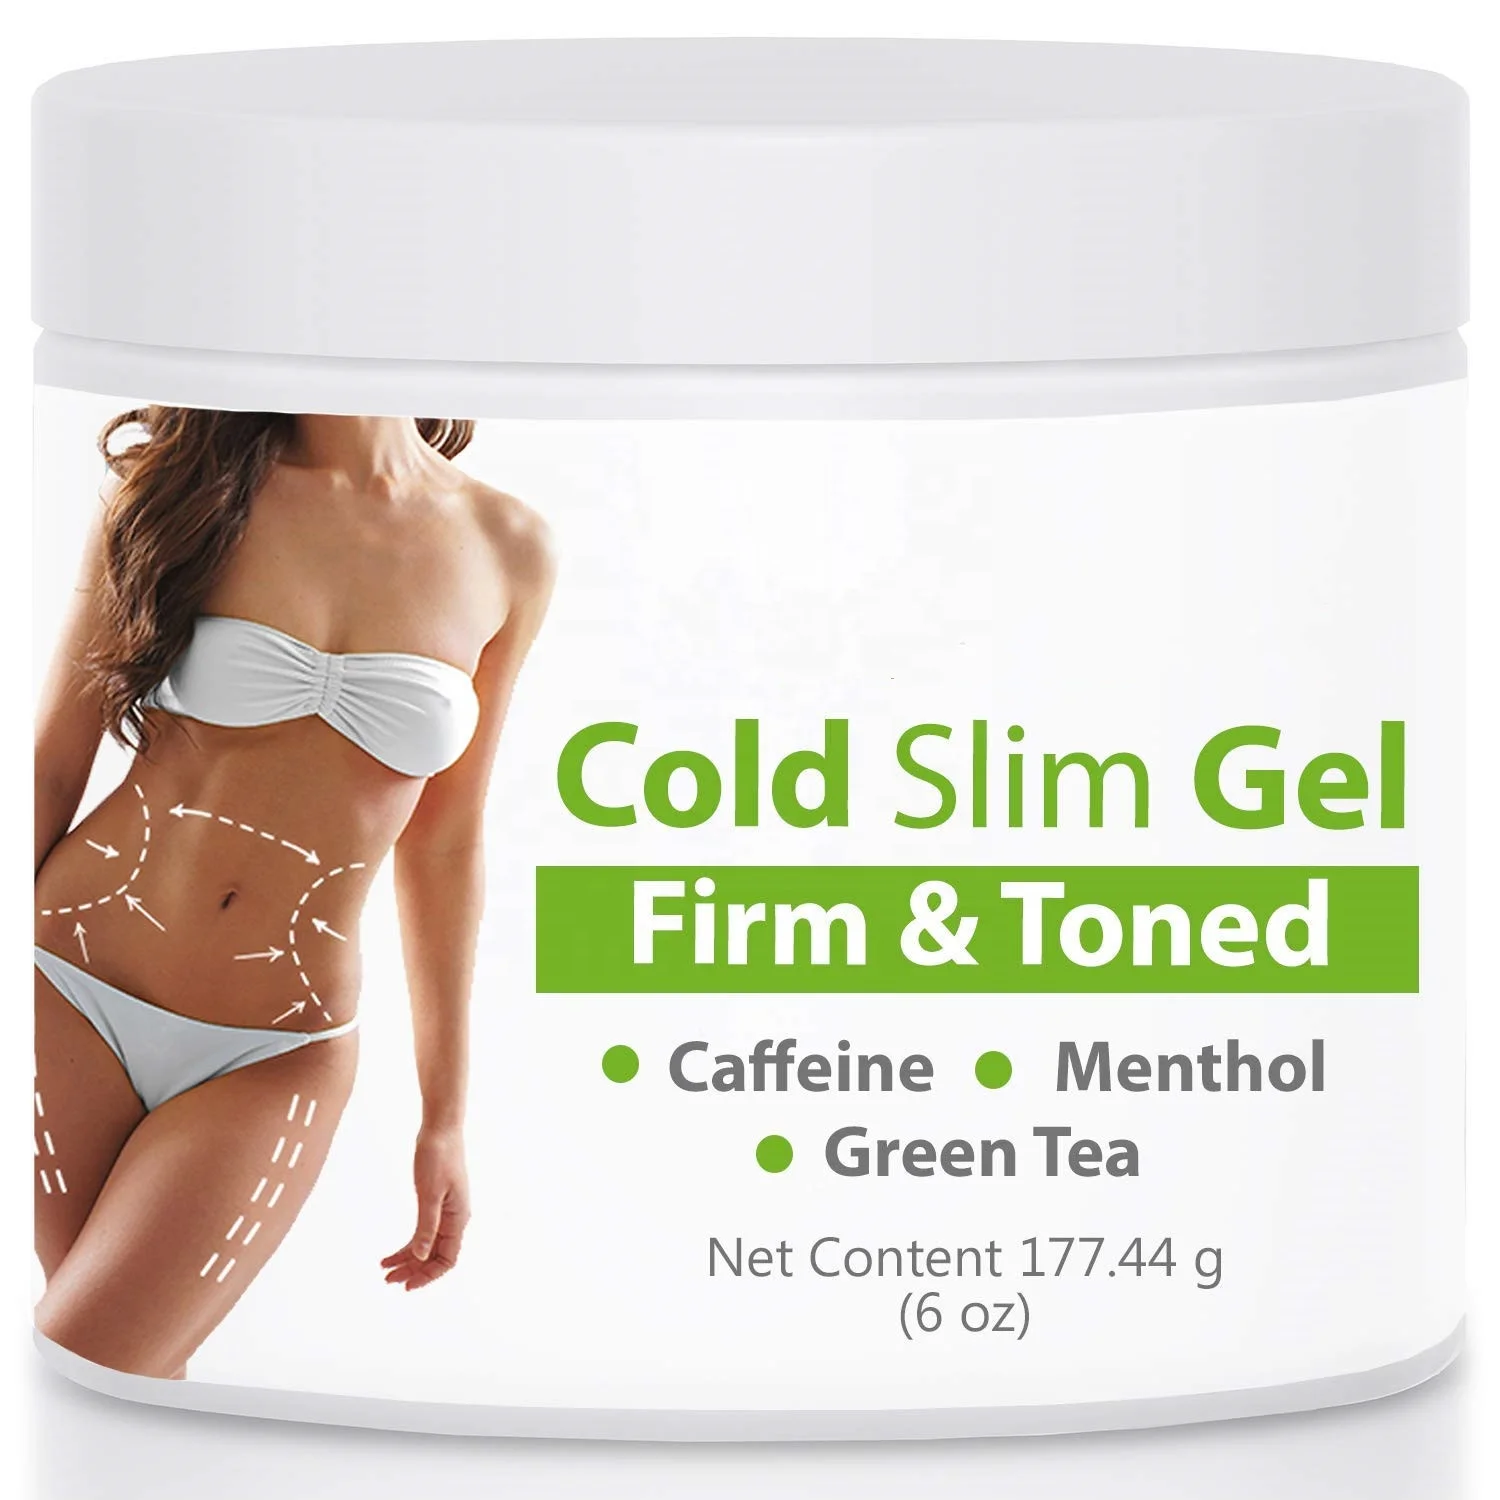 

Private Label / OEM Natural Custom Body Weight Loss Shaping Cellulite Fat Burning Sweat Gel Hot Slimming Firming Cream, Customed color